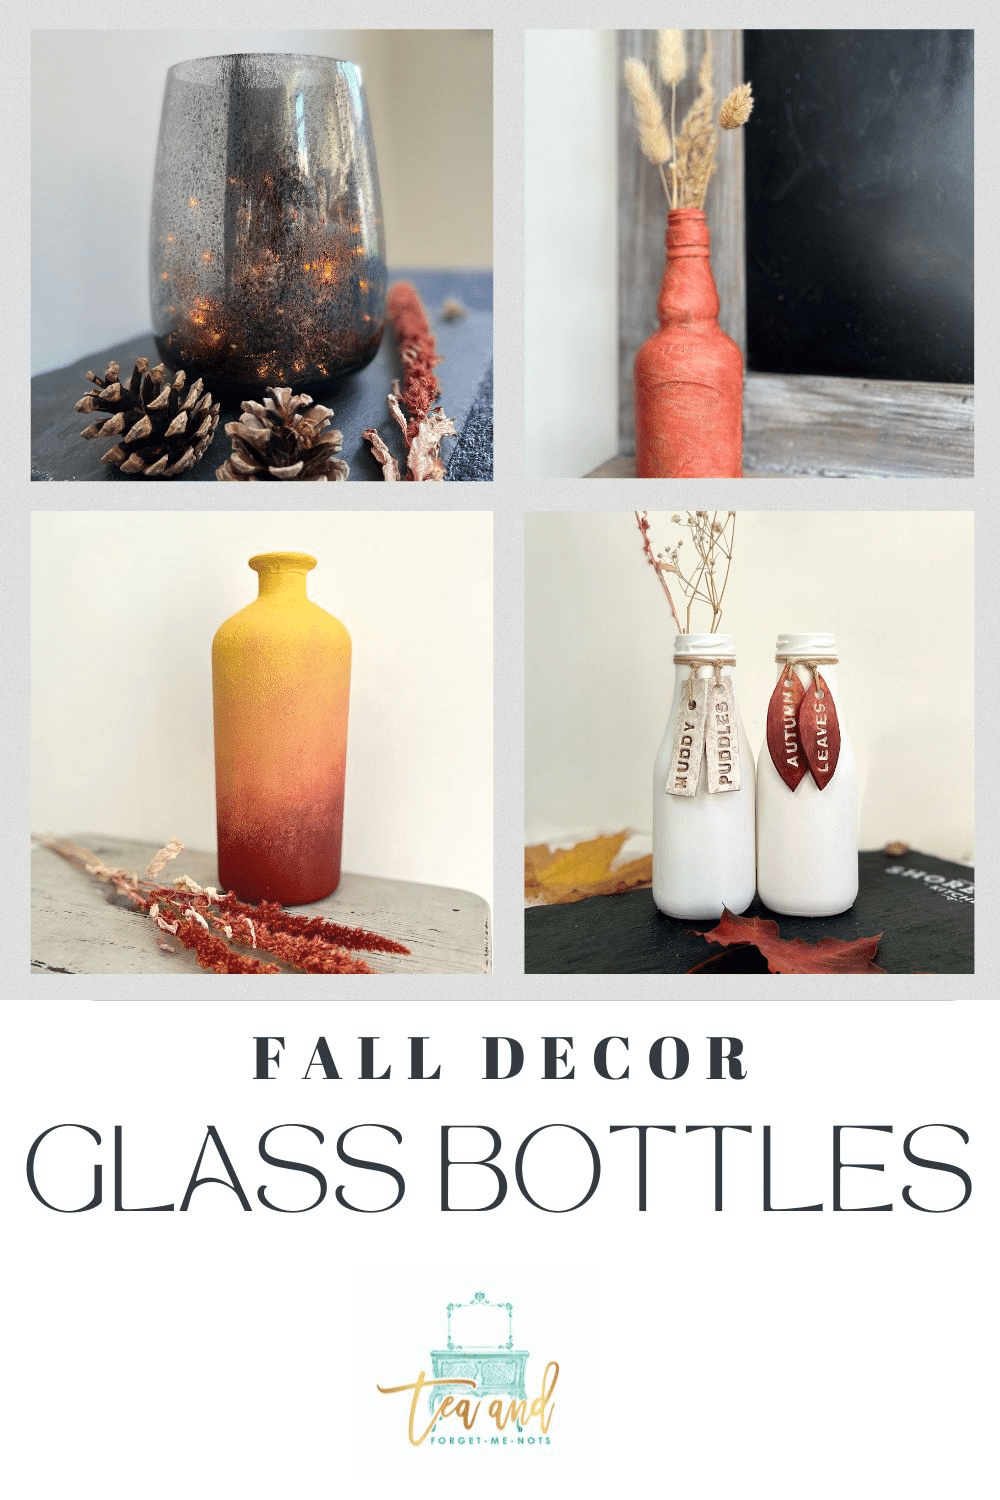 fall decor glass bottles pinterest pin - what to do with old glass bottles